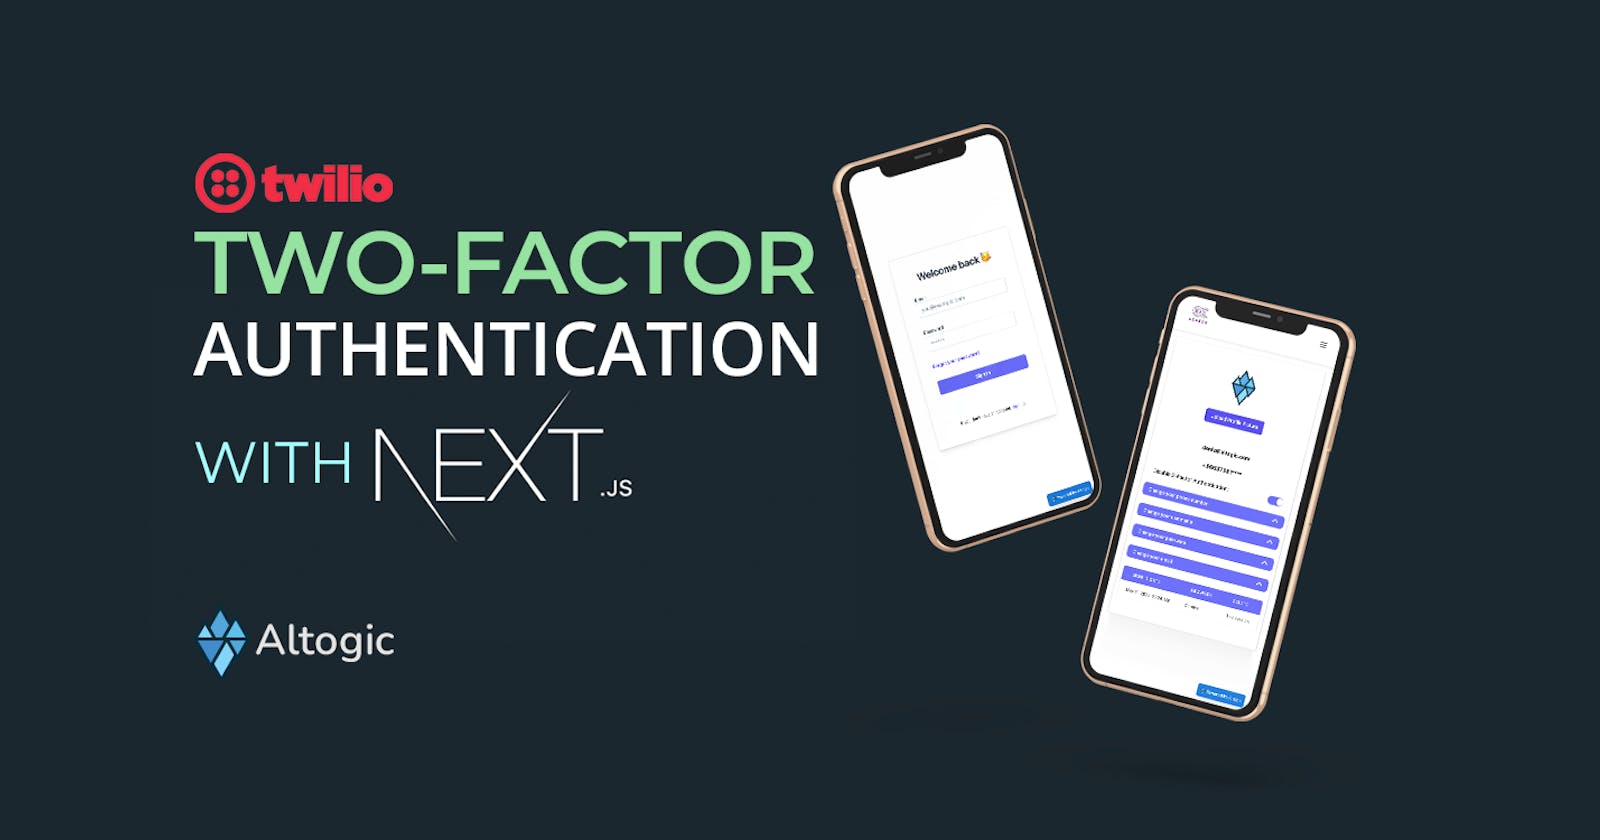 How to implement Two-Factor Authentication using Next.js, Twilio and Altogic